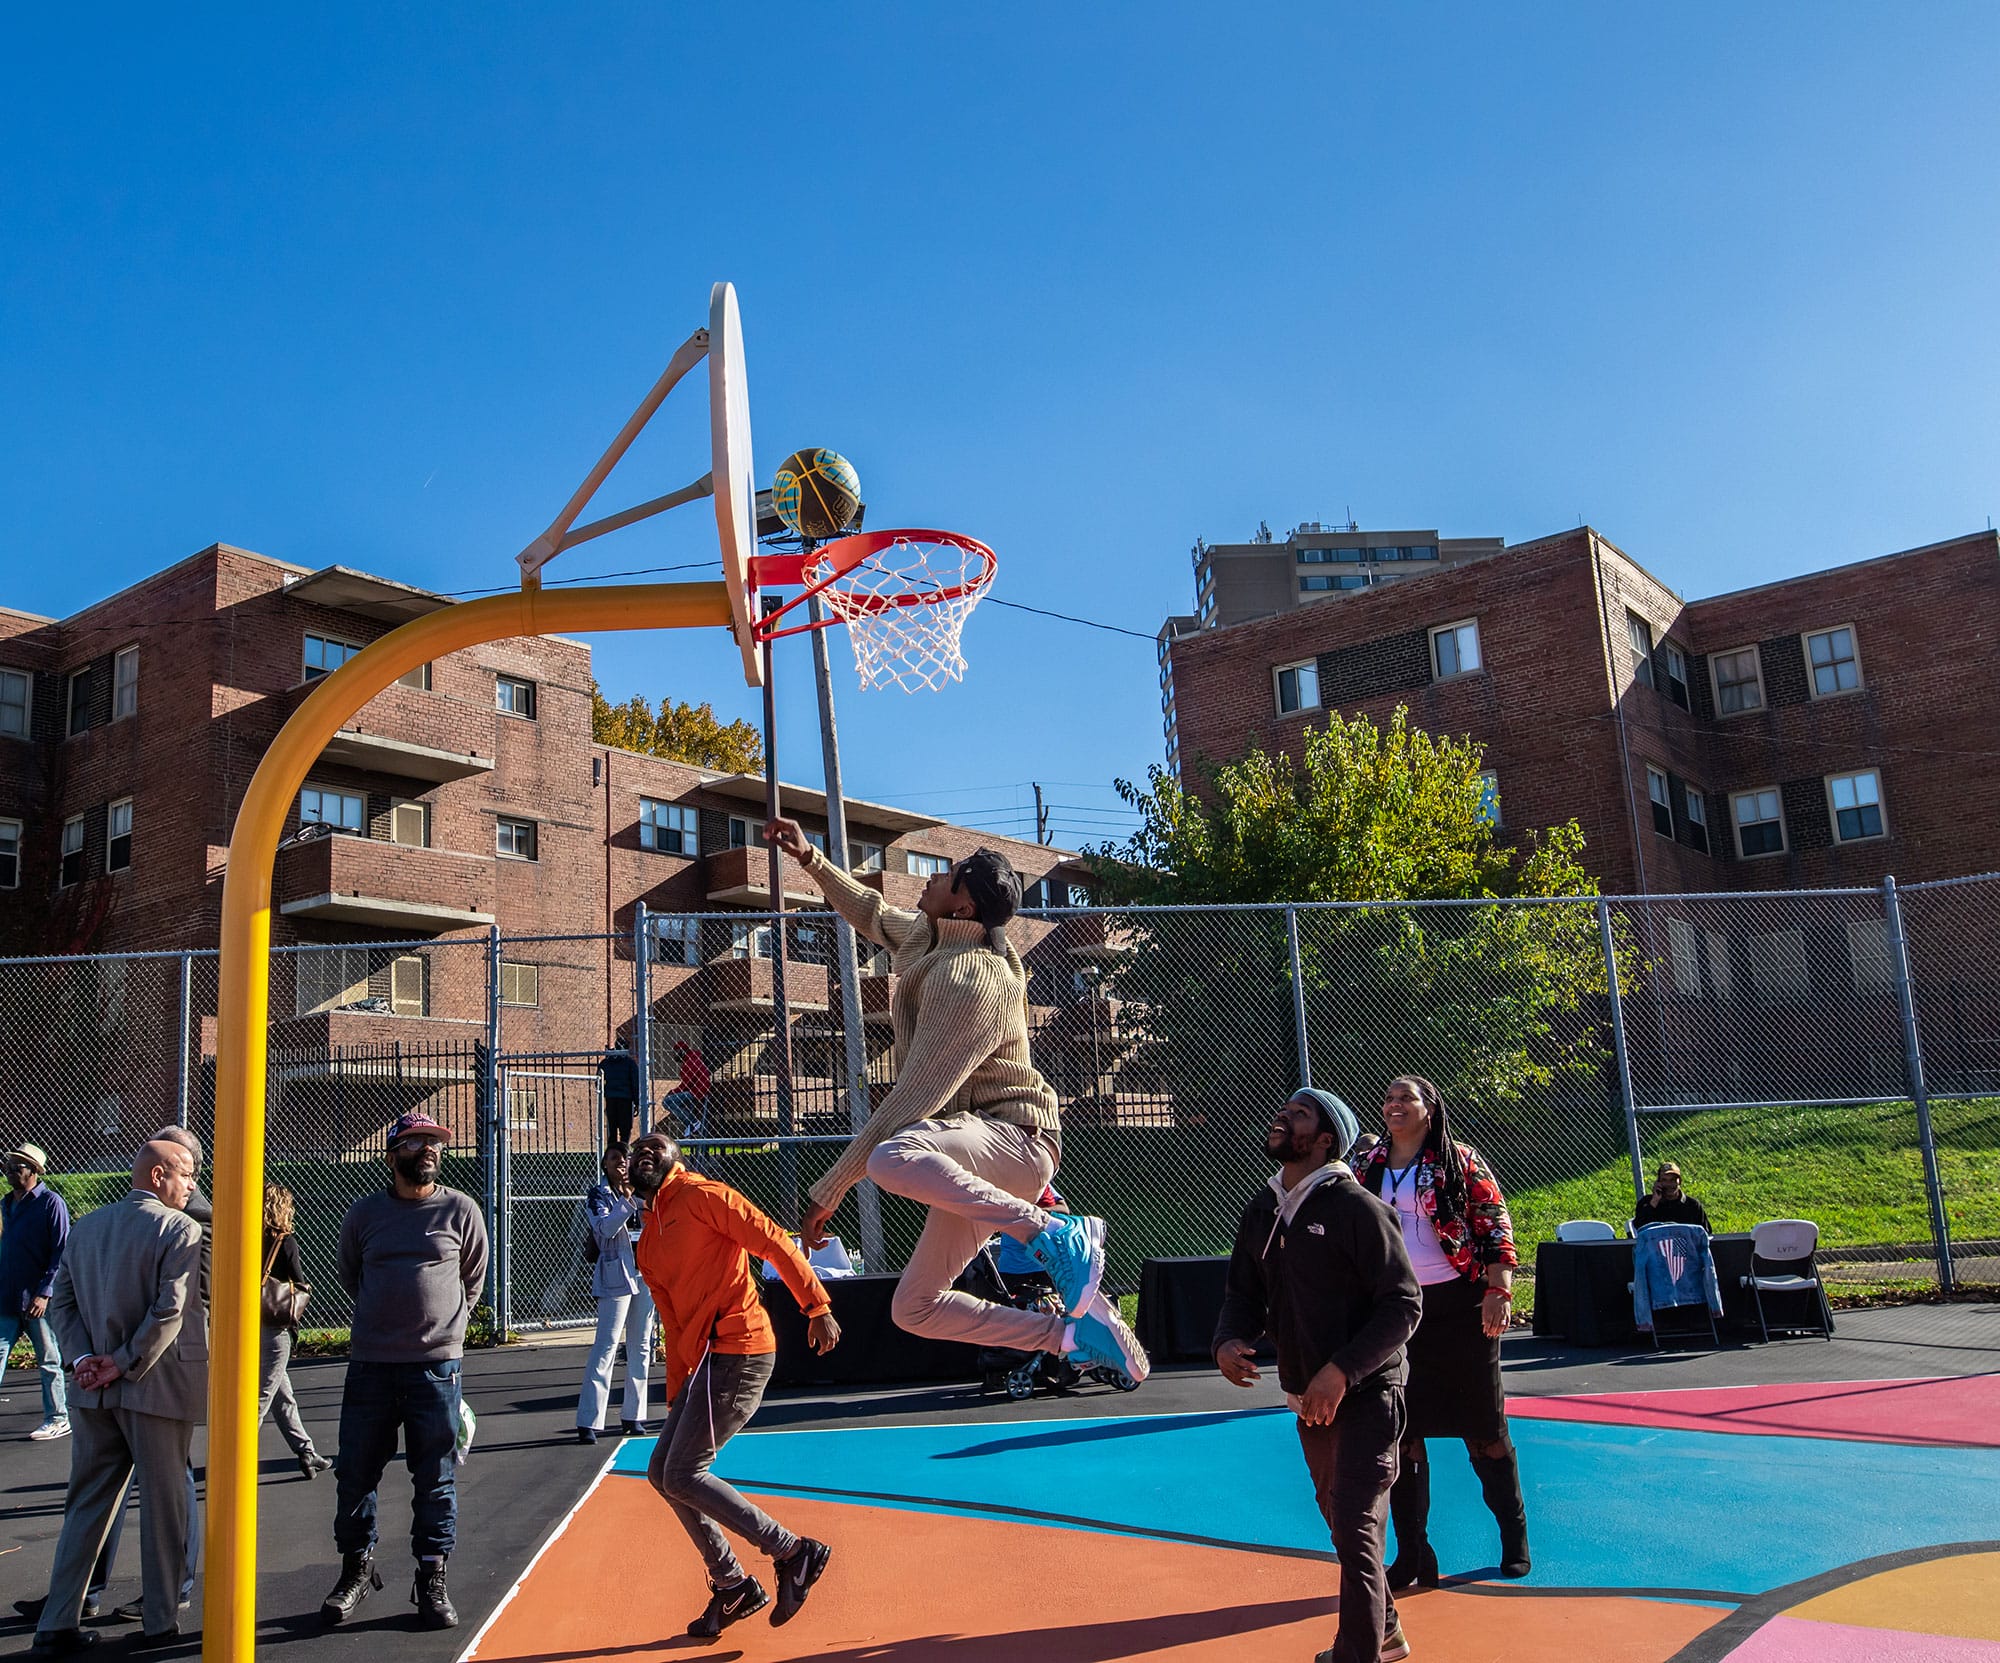 A group of people playing a game of basketball.